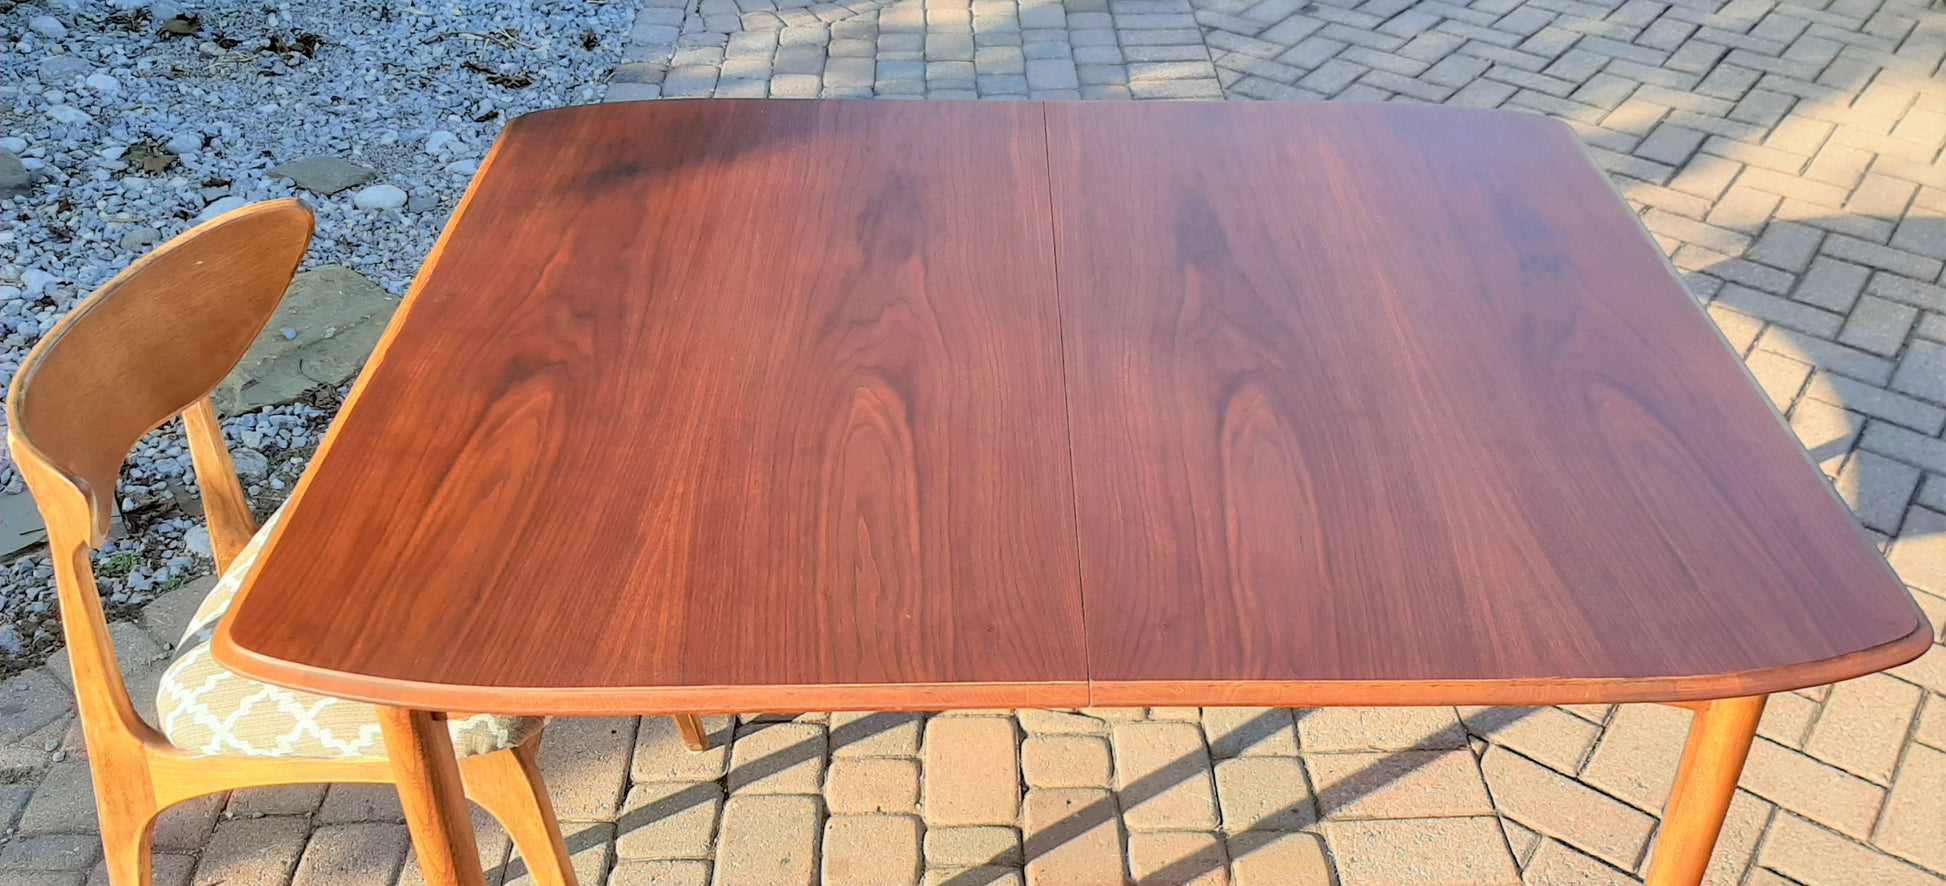 REFINISHED MCM Walnut Dining Table Extendable w 2 leaves by Deilcraft, perfect, 47"-71", optional custom glass - Mid Century Modern Toronto